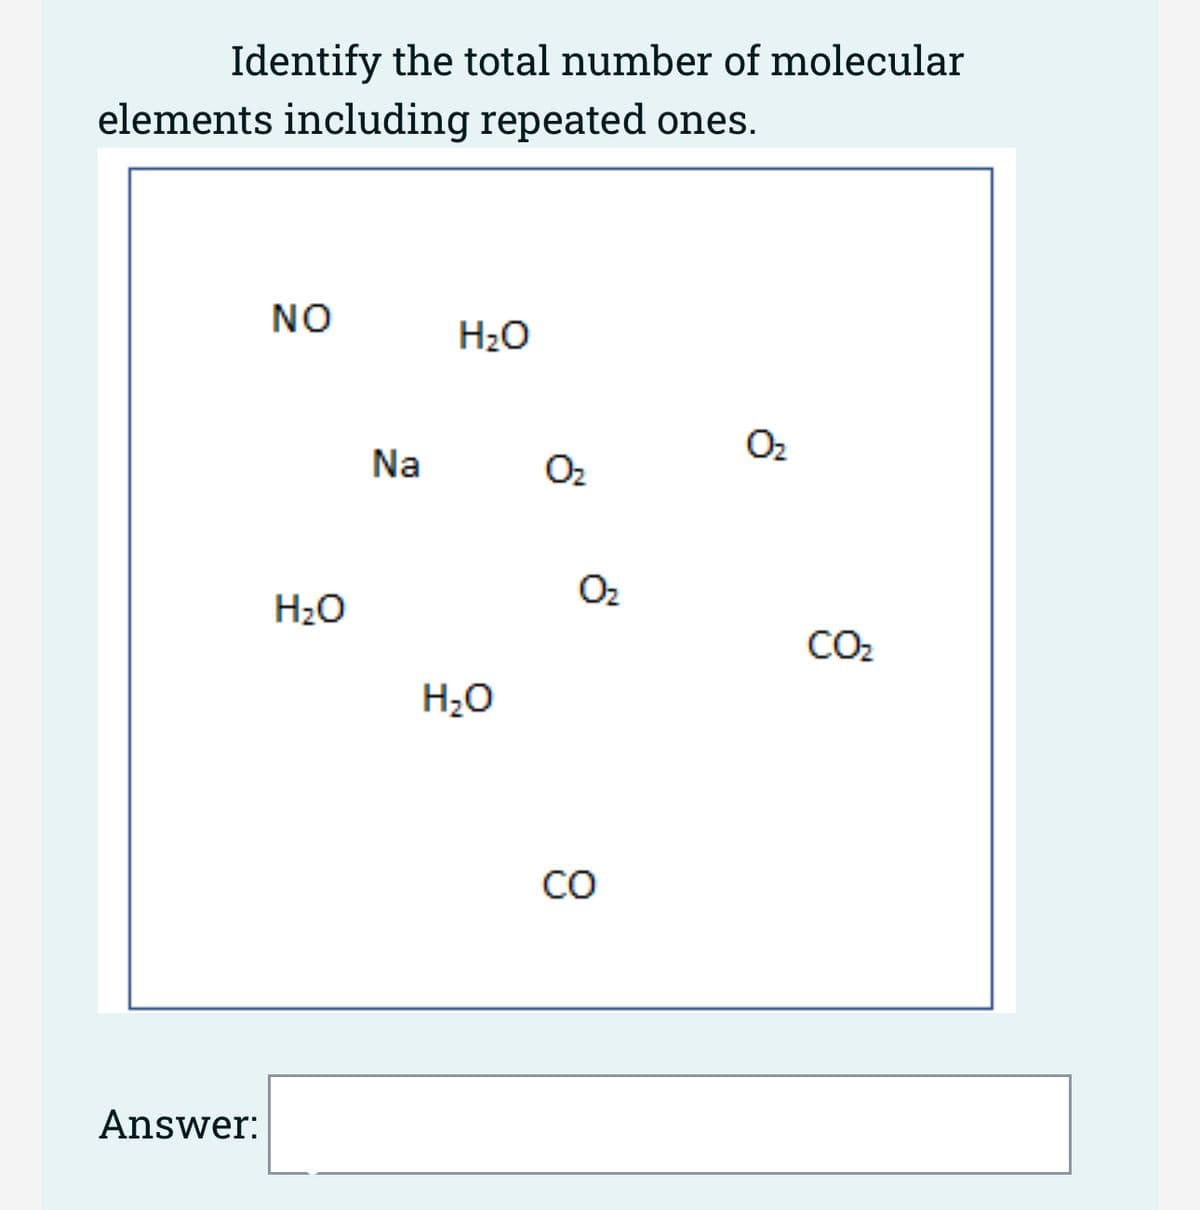 Identify the total number of molecular
elements including repeated ones.
Answer:
NO
H₂O
Na
H₂O
H₂O
O₂
O₂
CO
0₂
CO₂